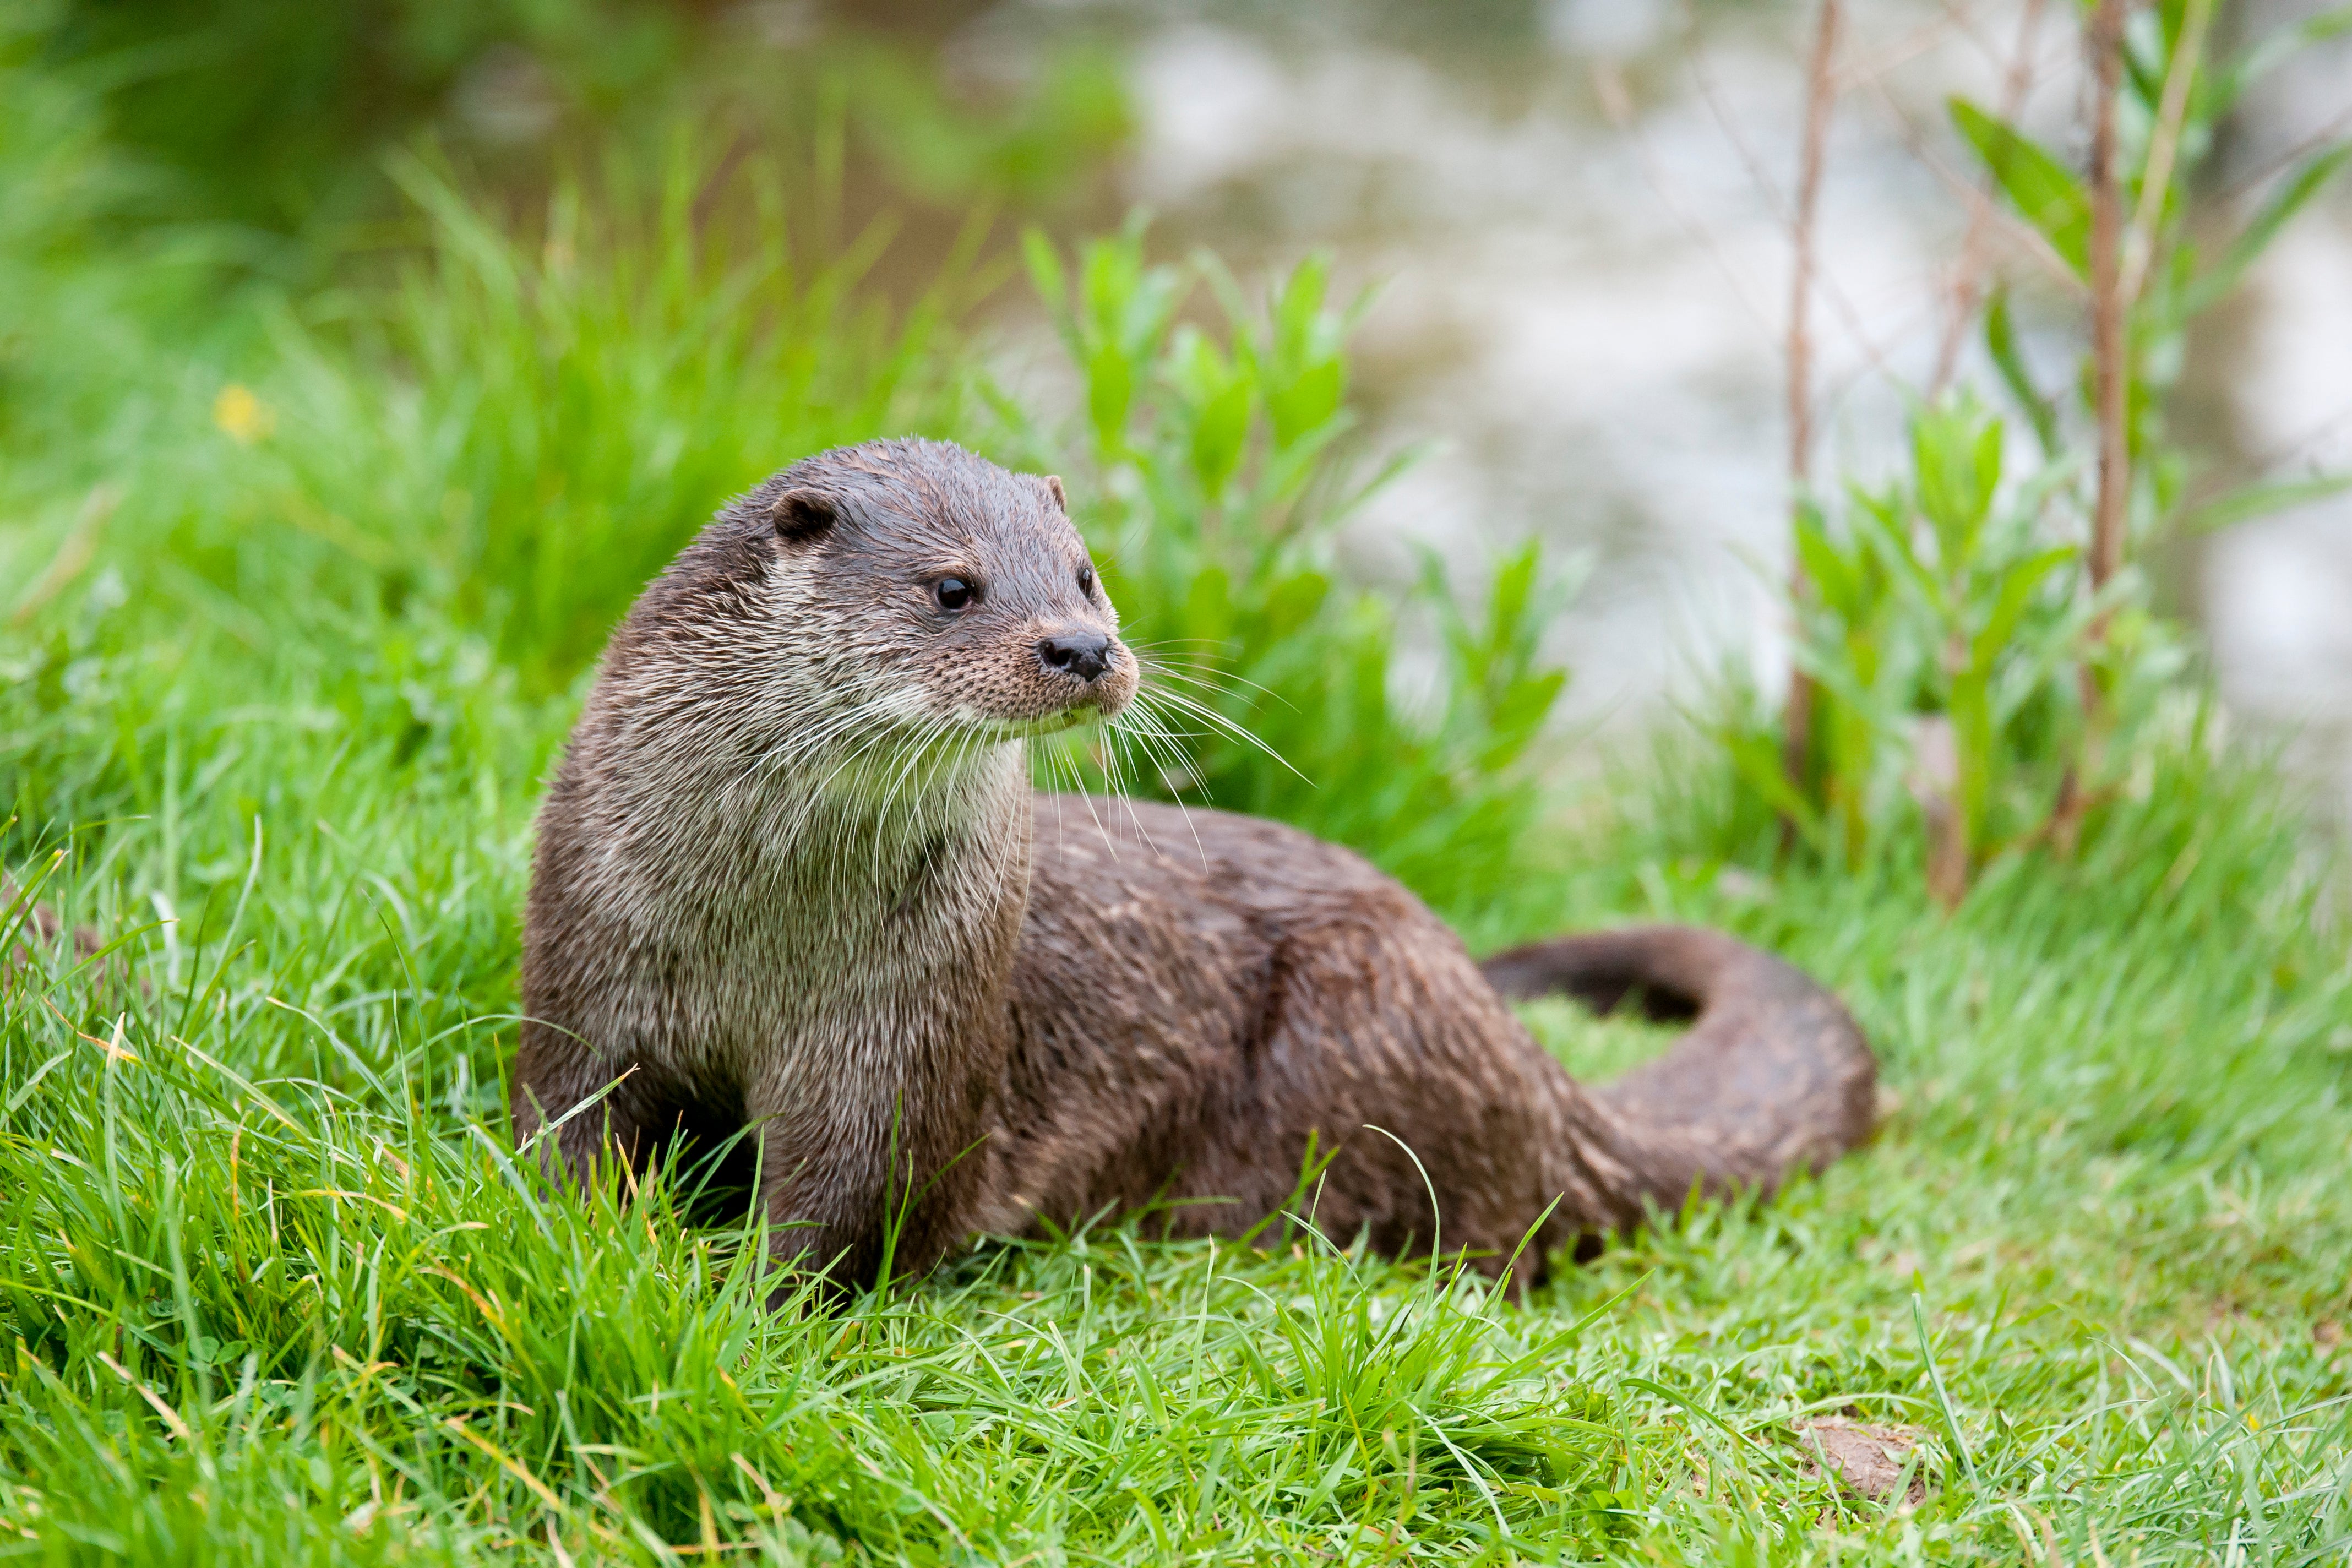 Villagers realised an otter was eating the fish five weeks ago